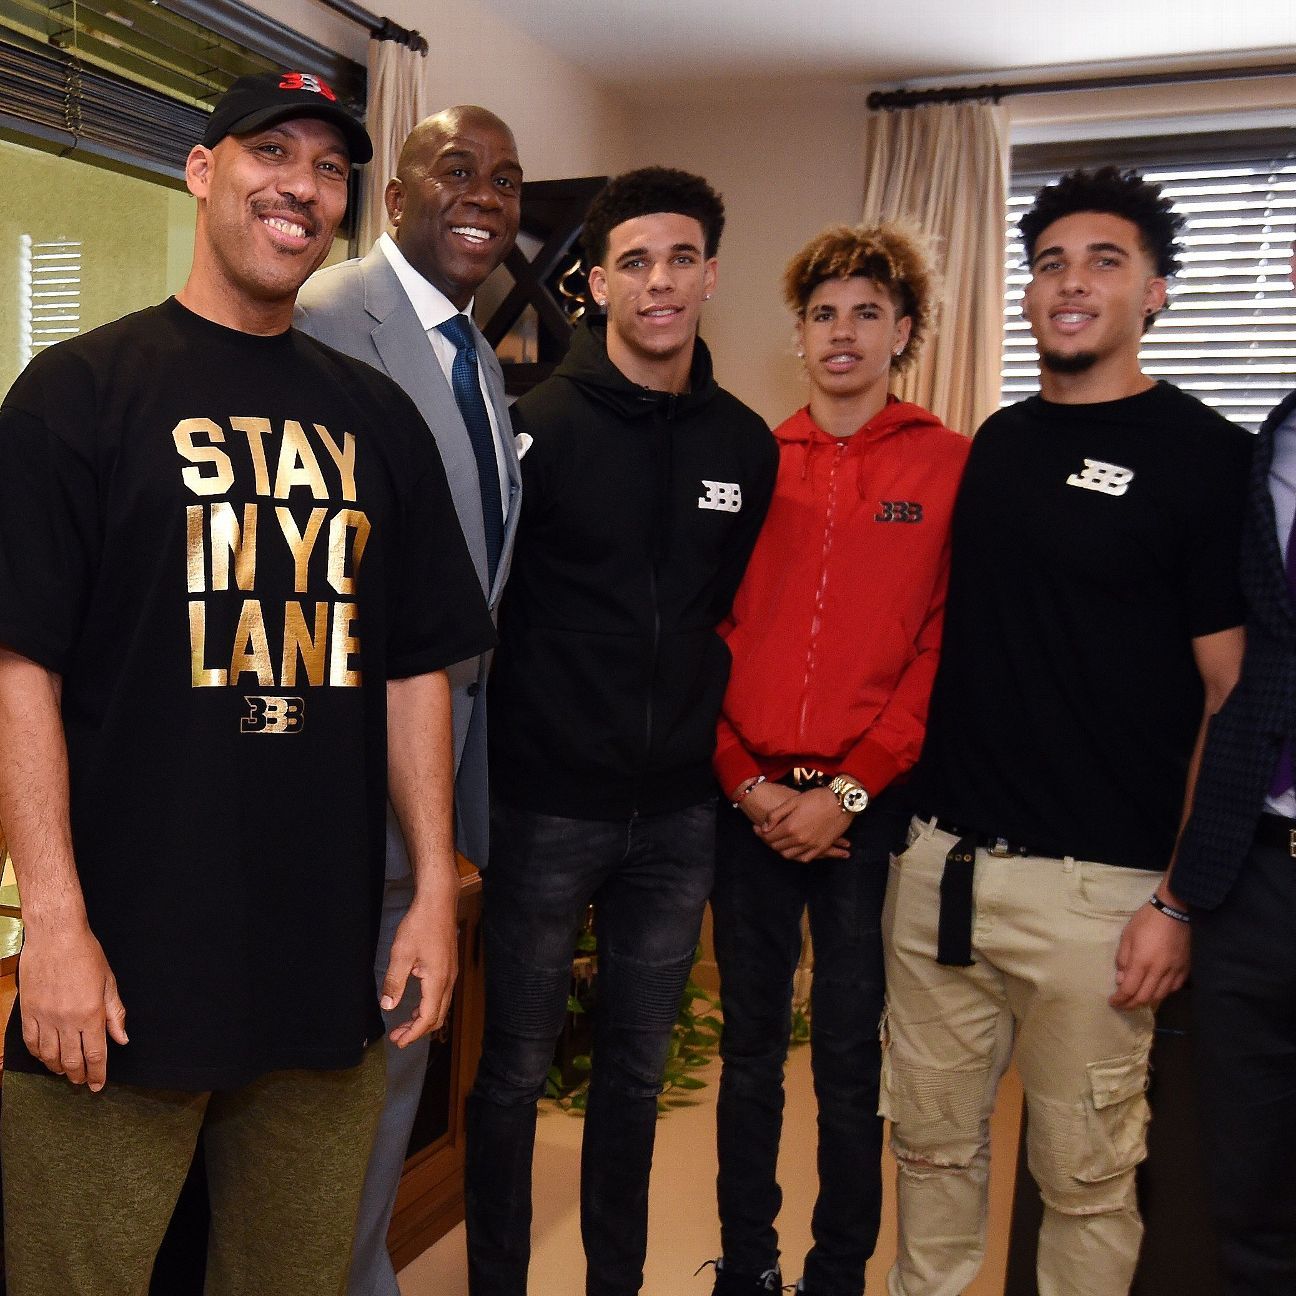 NBA: Brothers Lonzo, LiAngelo and LaMelo Ball set to sign with Roc